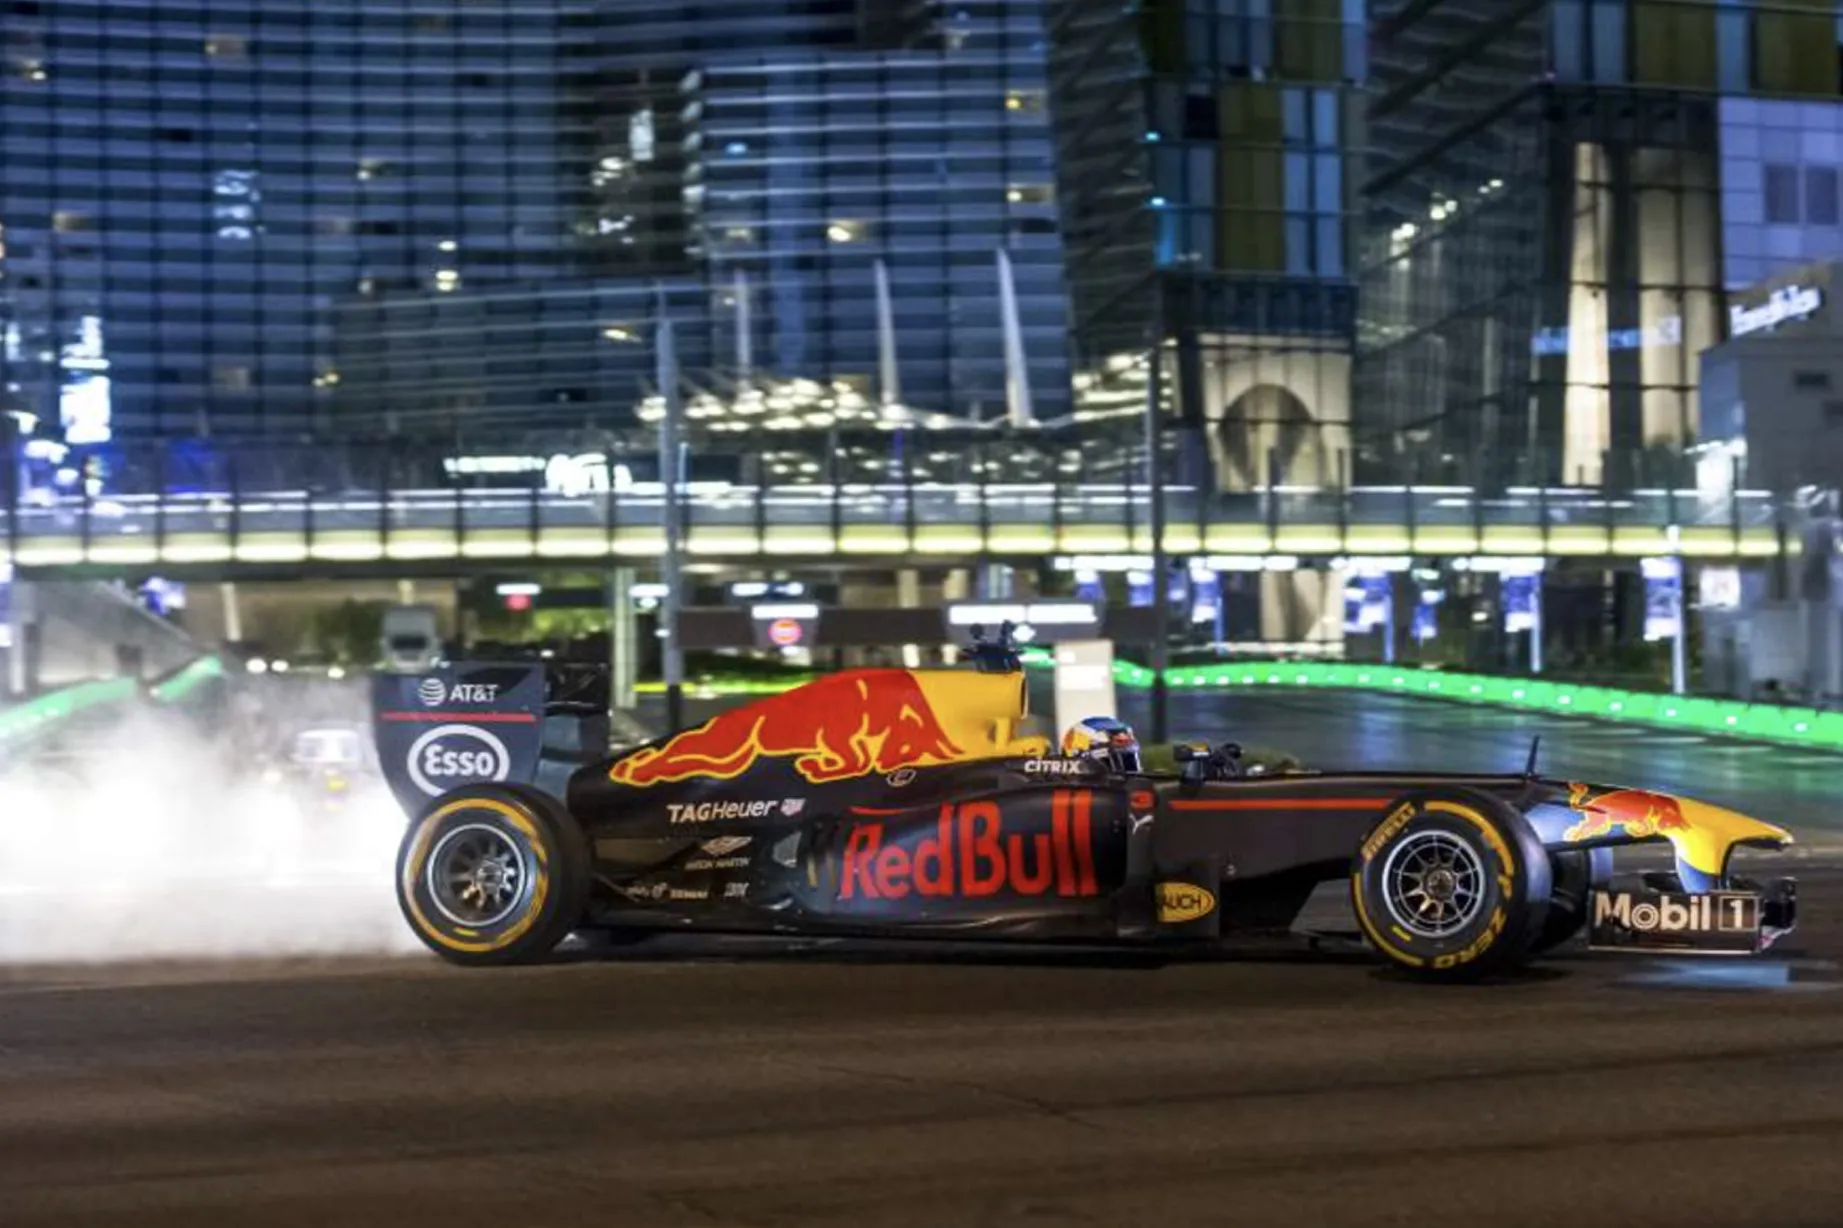 Indulge in five-star accommodation and hospitality during the F1 Las Vegas Grand Prix